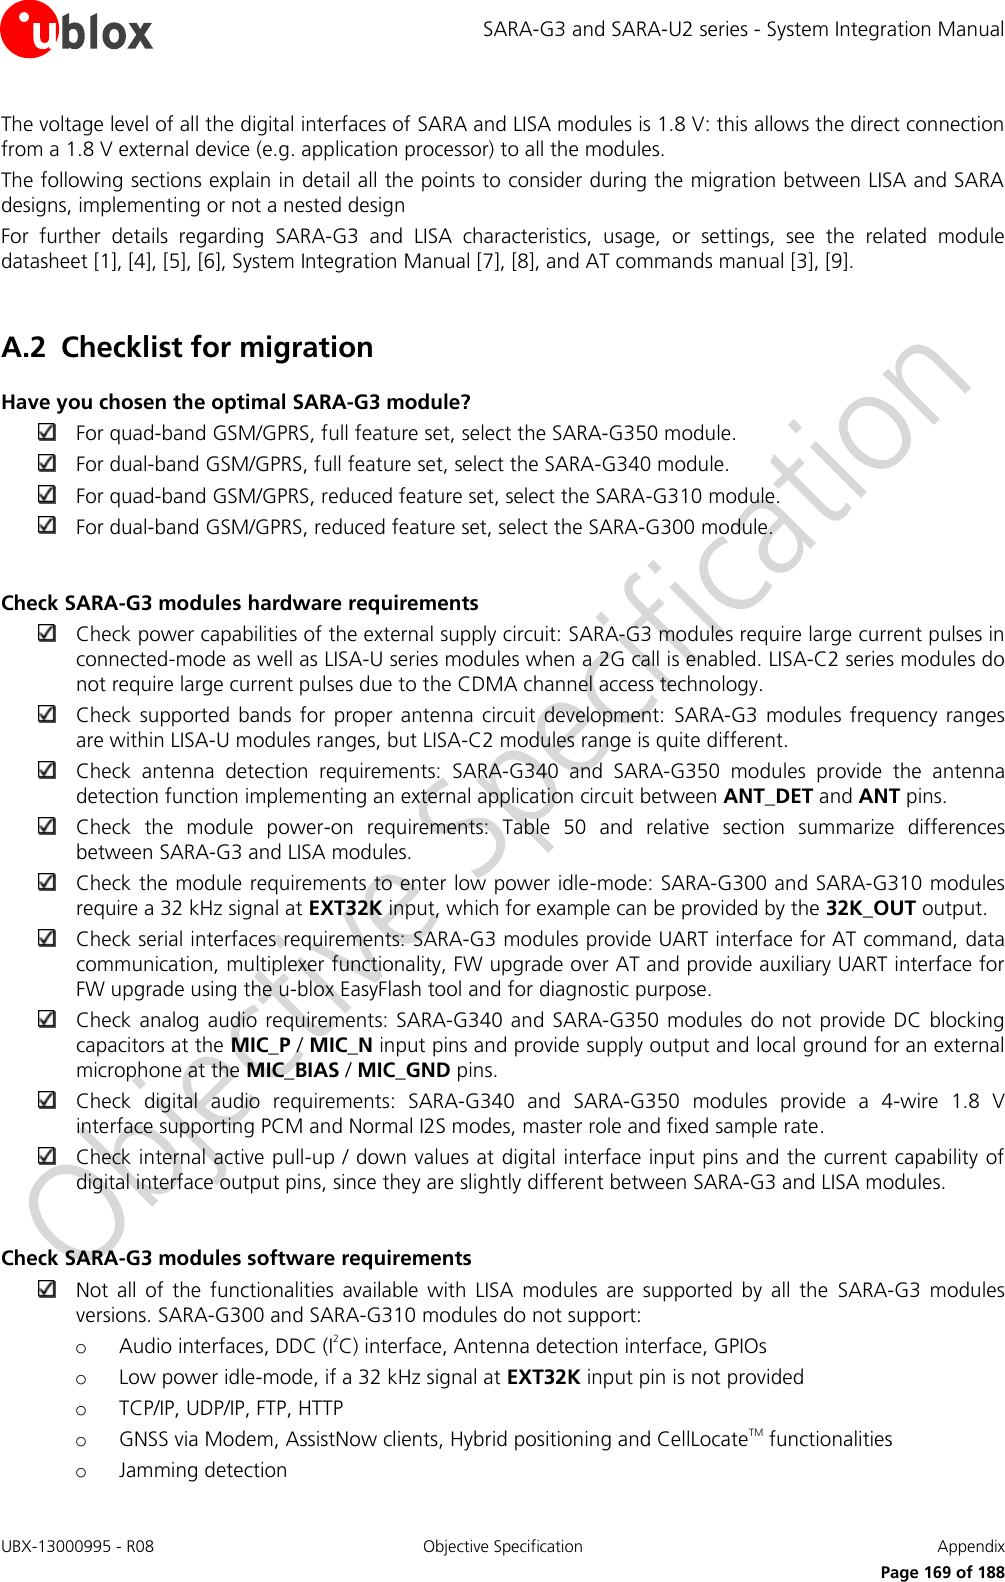 SARA-G3 and SARA-U2 series - System Integration Manual UBX-13000995 - R08  Objective Specification  Appendix      Page 169 of 188 The voltage level of all the digital interfaces of SARA and LISA modules is 1.8 V: this allows the direct connection from a 1.8 V external device (e.g. application processor) to all the modules. The following sections explain in detail all the points to consider during the migration between LISA and SARA designs, implementing or not a nested design For  further  details  regarding  SARA-G3  and  LISA  characteristics,  usage,  or  settings,  see  the  related  module datasheet [1], [4], [5], [6], System Integration Manual [7], [8], and AT commands manual [3], [9].  A.2 Checklist for migration Have you chosen the optimal SARA-G3 module?  For quad-band GSM/GPRS, full feature set, select the SARA-G350 module.  For dual-band GSM/GPRS, full feature set, select the SARA-G340 module.  For quad-band GSM/GPRS, reduced feature set, select the SARA-G310 module.  For dual-band GSM/GPRS, reduced feature set, select the SARA-G300 module.  Check SARA-G3 modules hardware requirements  Check power capabilities of the external supply circuit: SARA-G3 modules require large current pulses in connected-mode as well as LISA-U series modules when a 2G call is enabled. LISA-C2 series modules do not require large current pulses due to the CDMA channel access technology.  Check  supported  bands for  proper antenna circuit  development:  SARA-G3  modules  frequency  ranges are within LISA-U modules ranges, but LISA-C2 modules range is quite different.  Check  antenna  detection  requirements:  SARA-G340  and  SARA-G350  modules  provide  the  antenna detection function implementing an external application circuit between ANT_DET and ANT pins.  Check  the  module  power-on  requirements:  Table  50  and  relative  section  summarize  differences between SARA-G3 and LISA modules.  Check the module requirements to enter low power idle-mode: SARA-G300 and SARA-G310 modules require a 32 kHz signal at EXT32K input, which for example can be provided by the 32K_OUT output.  Check serial interfaces requirements: SARA-G3 modules provide UART interface for AT command, data communication, multiplexer functionality, FW upgrade over AT and provide auxiliary UART interface for FW upgrade using the u-blox EasyFlash tool and for diagnostic purpose.  Check analog audio requirements: SARA-G340 and  SARA-G350 modules  do  not provide  DC blocking capacitors at the MIC_P / MIC_N input pins and provide supply output and local ground for an external microphone at the MIC_BIAS / MIC_GND pins.  Check  digital  audio  requirements:  SARA-G340  and  SARA-G350  modules  provide  a  4-wire  1.8  V interface supporting PCM and Normal I2S modes, master role and fixed sample rate.  Check internal active pull-up / down values at digital interface input pins and the current capability of digital interface output pins, since they are slightly different between SARA-G3 and LISA modules.  Check SARA-G3 modules software requirements  Not  all  of  the  functionalities  available  with  LISA  modules  are  supported  by  all  the  SARA-G3  modules versions. SARA-G300 and SARA-G310 modules do not support: o Audio interfaces, DDC (I2C) interface, Antenna detection interface, GPIOs o Low power idle-mode, if a 32 kHz signal at EXT32K input pin is not provided o TCP/IP, UDP/IP, FTP, HTTP o GNSS via Modem, AssistNow clients, Hybrid positioning and CellLocateTM functionalities o Jamming detection  